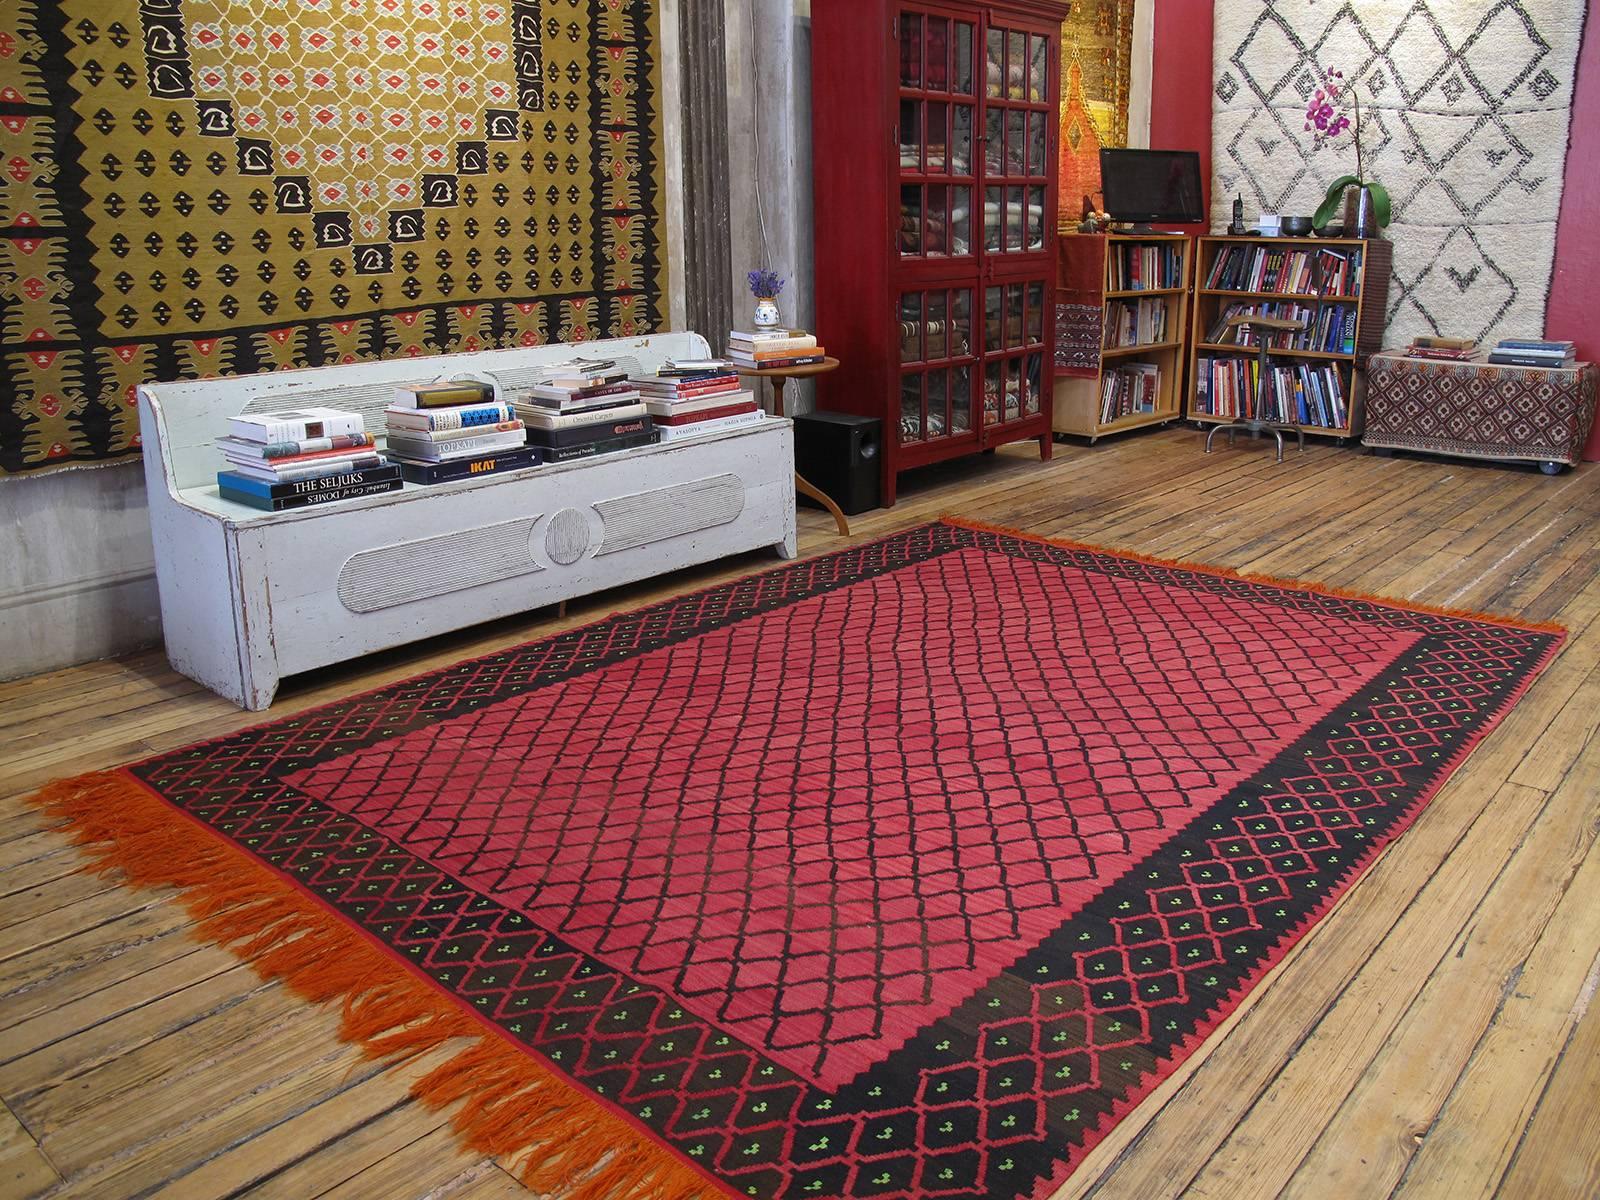 Balkan Kilim rug with lattice design. A lovely old flat-weave rug from Southeastern Europe with a simple, almost minimalist design and color palette. The kilim rug does have some age but was probably used very sparingly as it has survived in almost